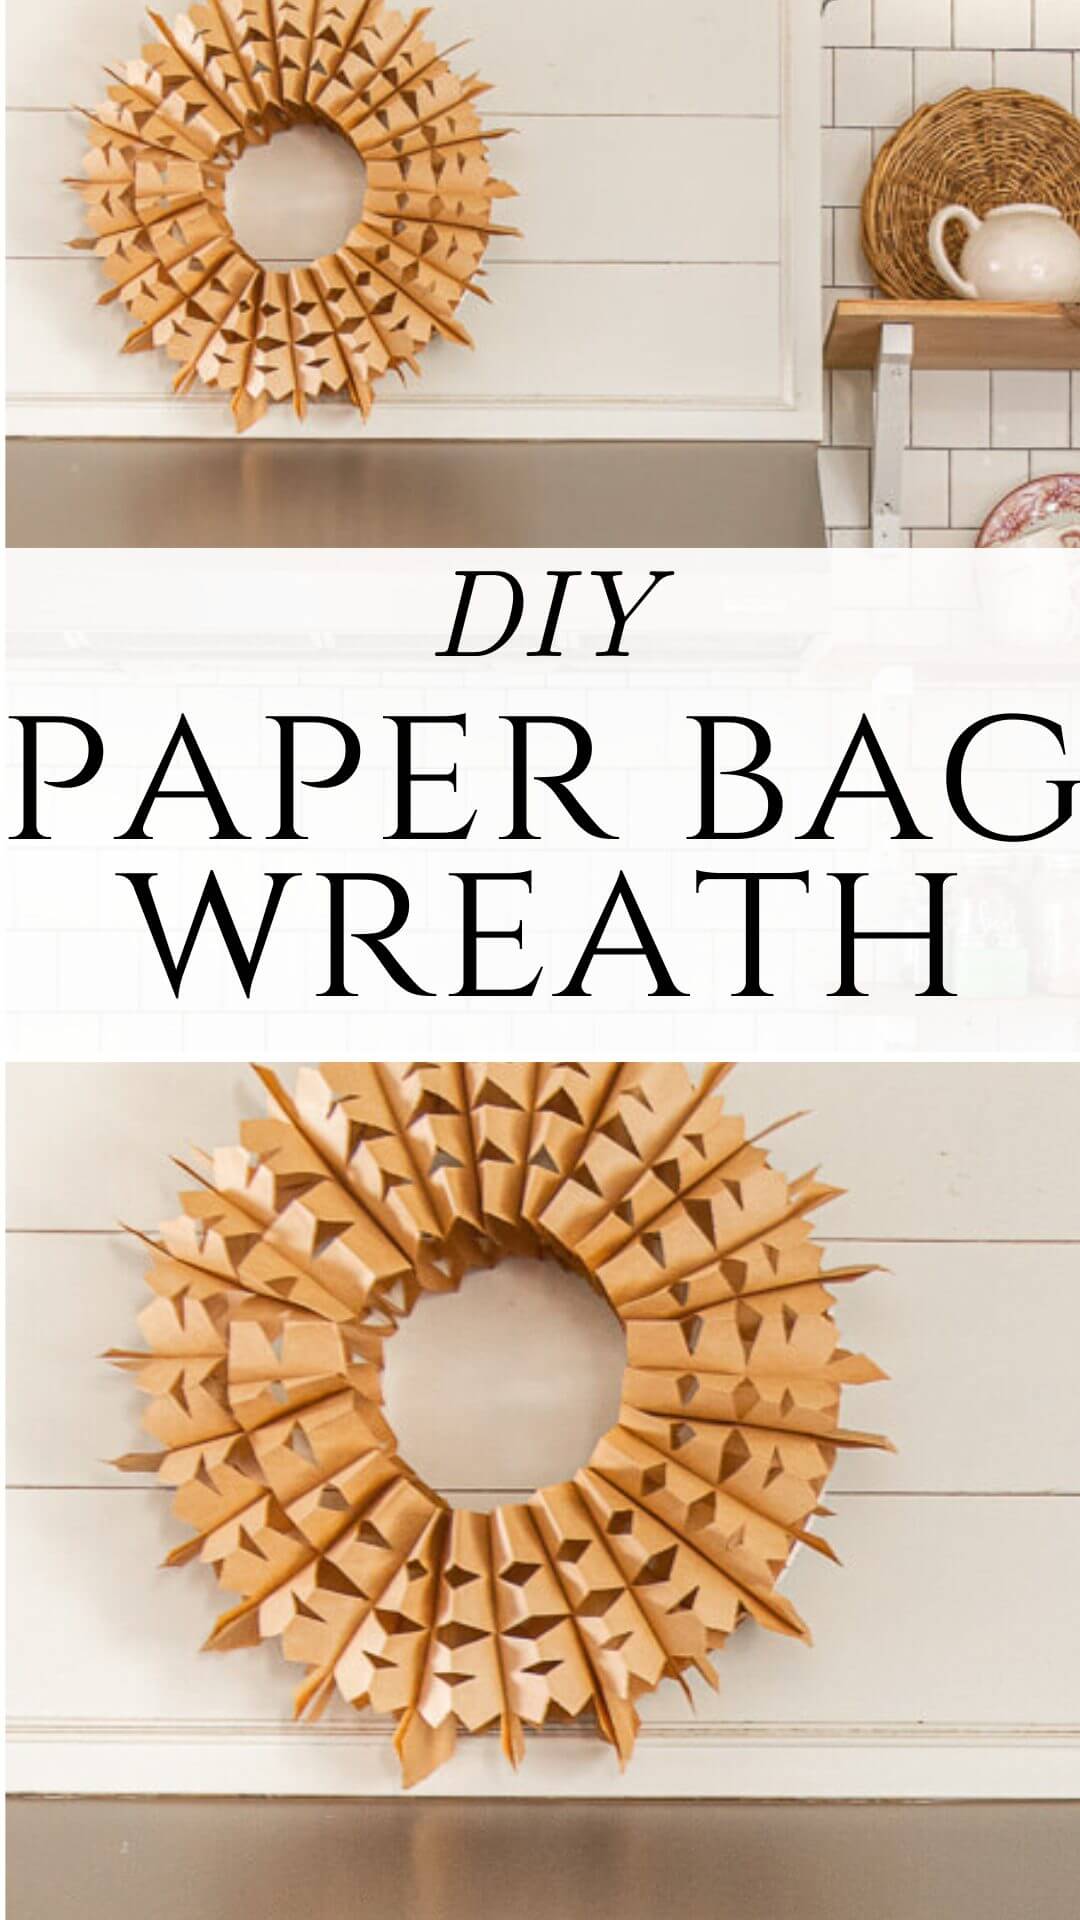 Easy and Fun Paper Bag Snowflakes From Lunch Bags - Jennifer Rizzo